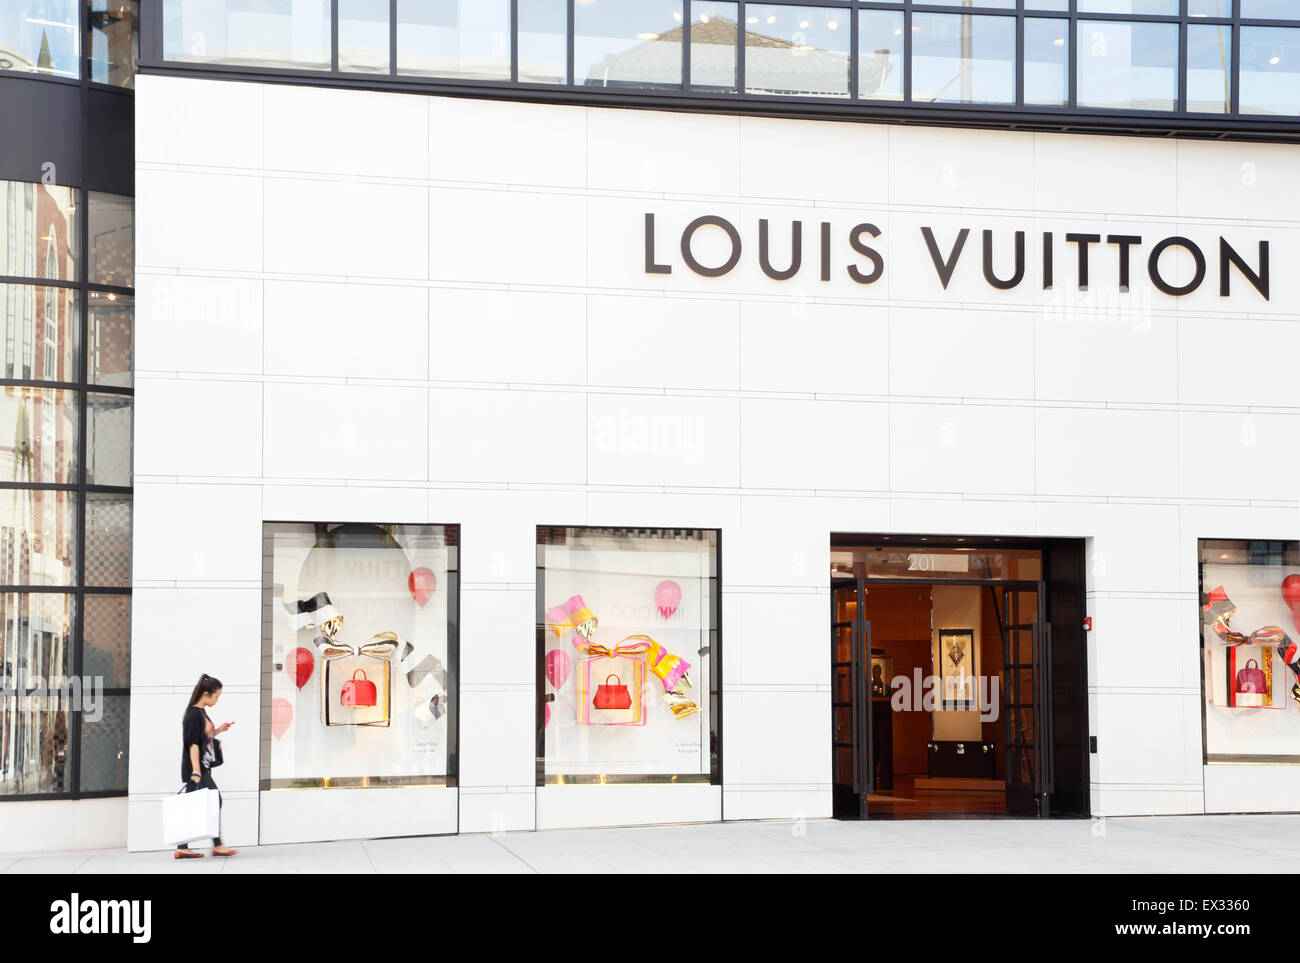 Louis Vuitton Store At Rodeo Drive In Beverly Hills California Stock Photo  - Download Image Now - iStock